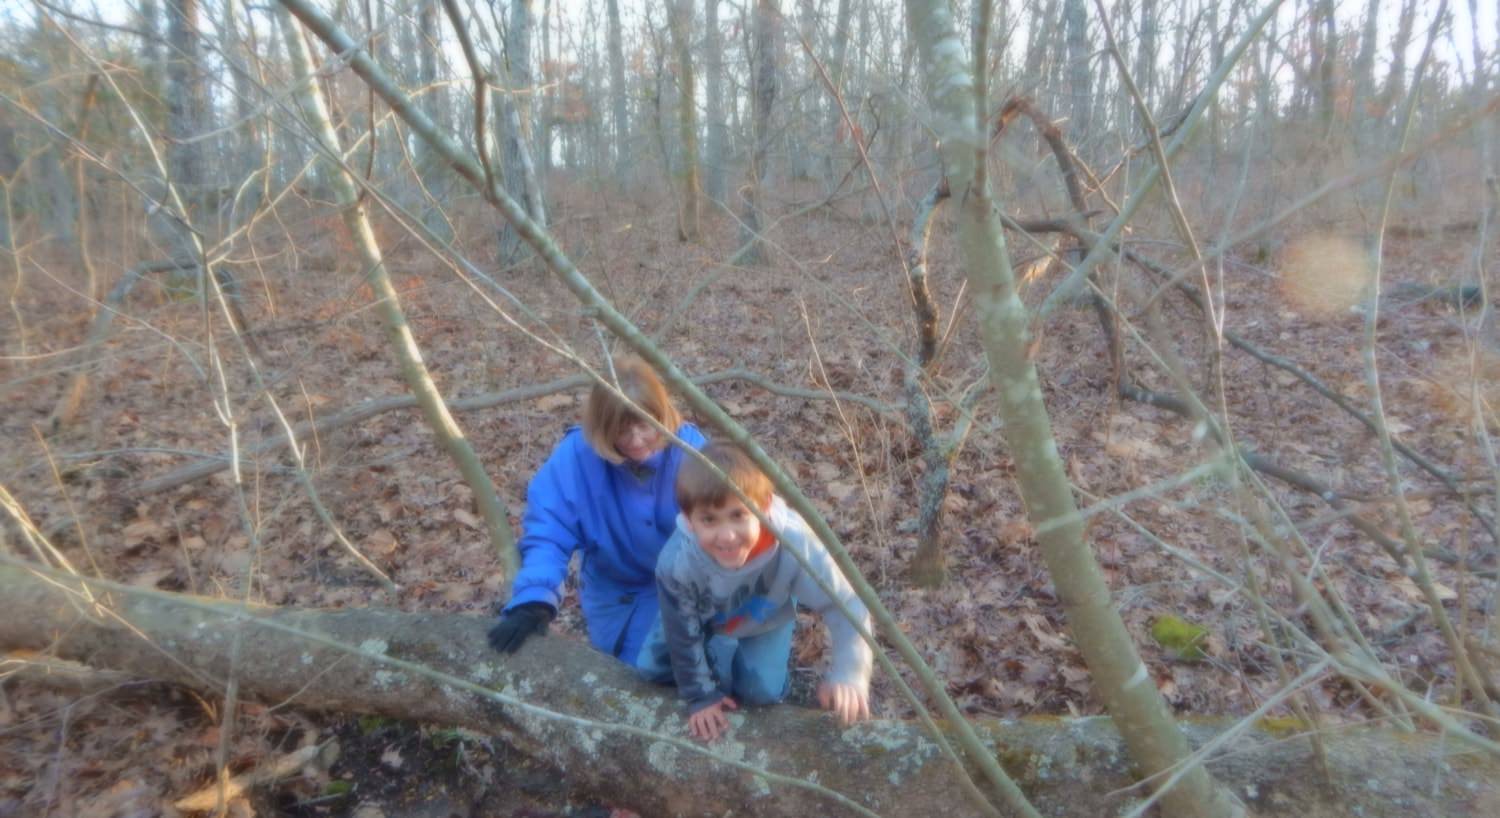 Lady with blue coat and boy with gray sweatshirt climbing on old trees in woods